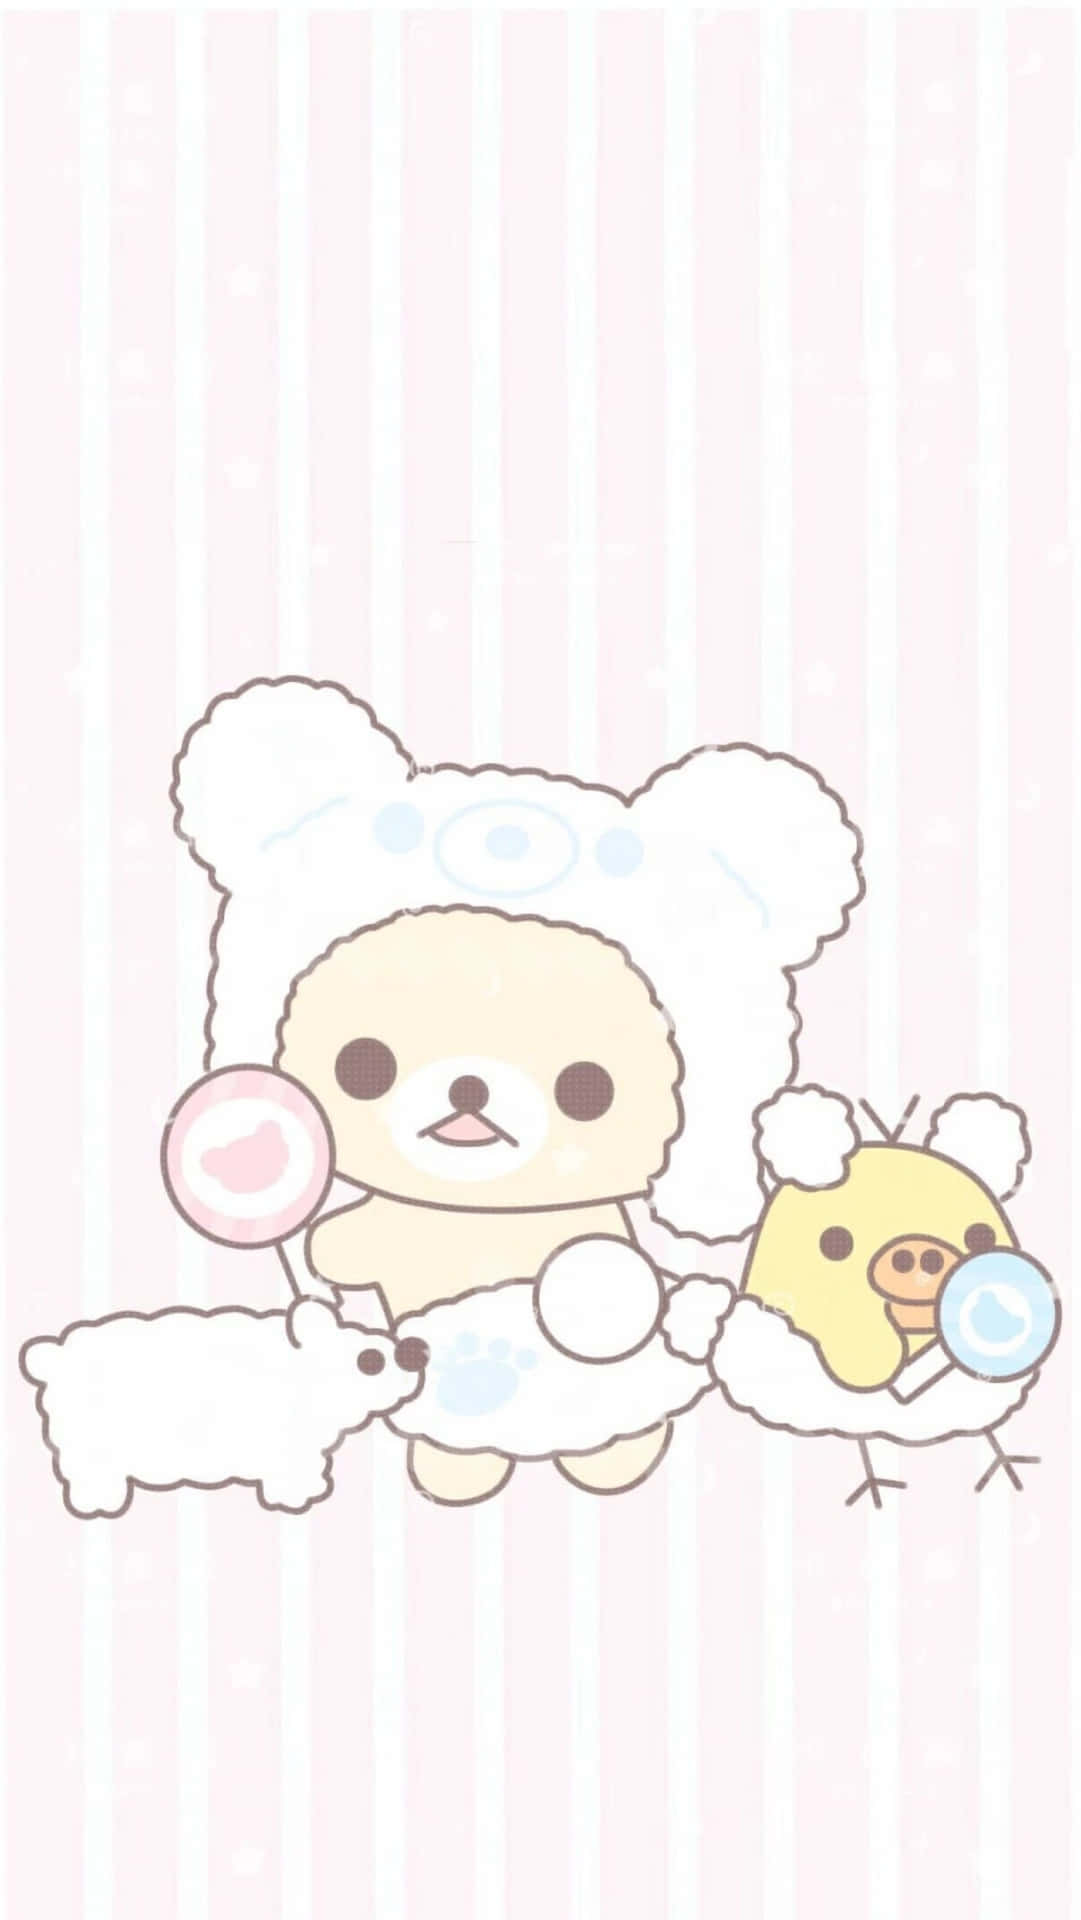 Get That Last Bit of Relaxation with Cute Rilakkuma Wallpaper